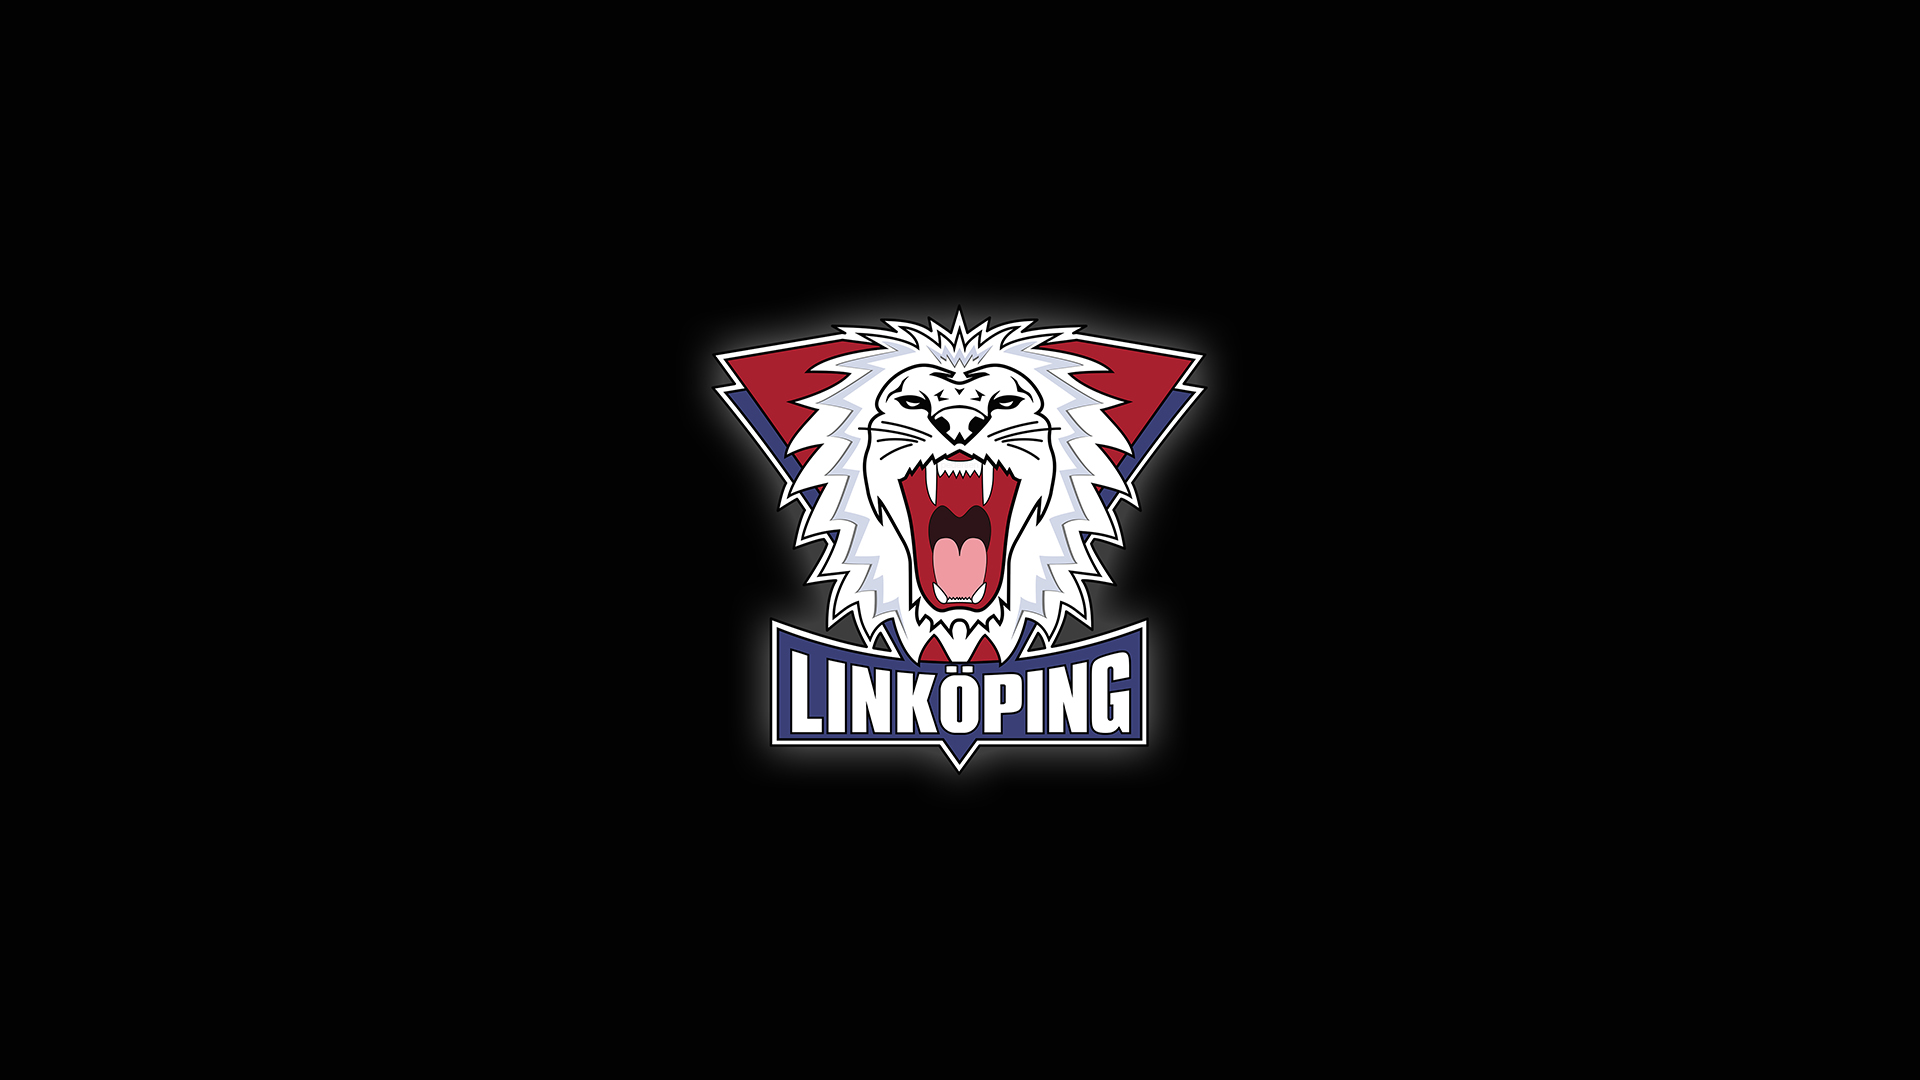 Linkoping LHC SHL Logo Simple Background Digital Art Minimalism Animals Pointy Teeth Open Mouth Whis 1920x1080